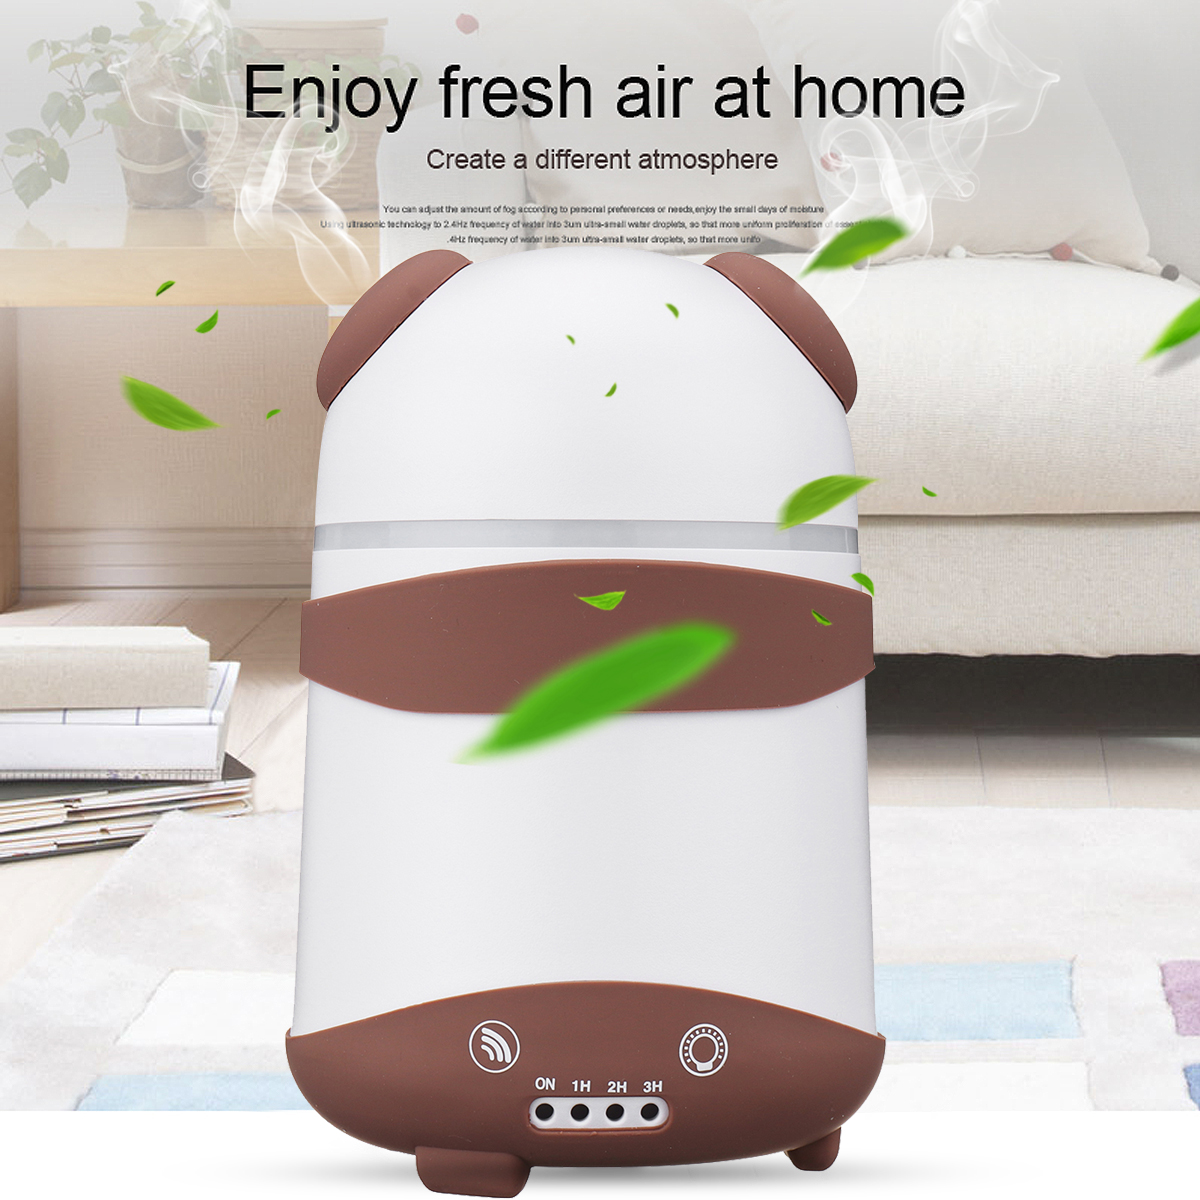 Dual Humidifier Air Oil Diffuser Aroma Mist Maker LED Cartoon Panda Style For Home Office US Plug 50